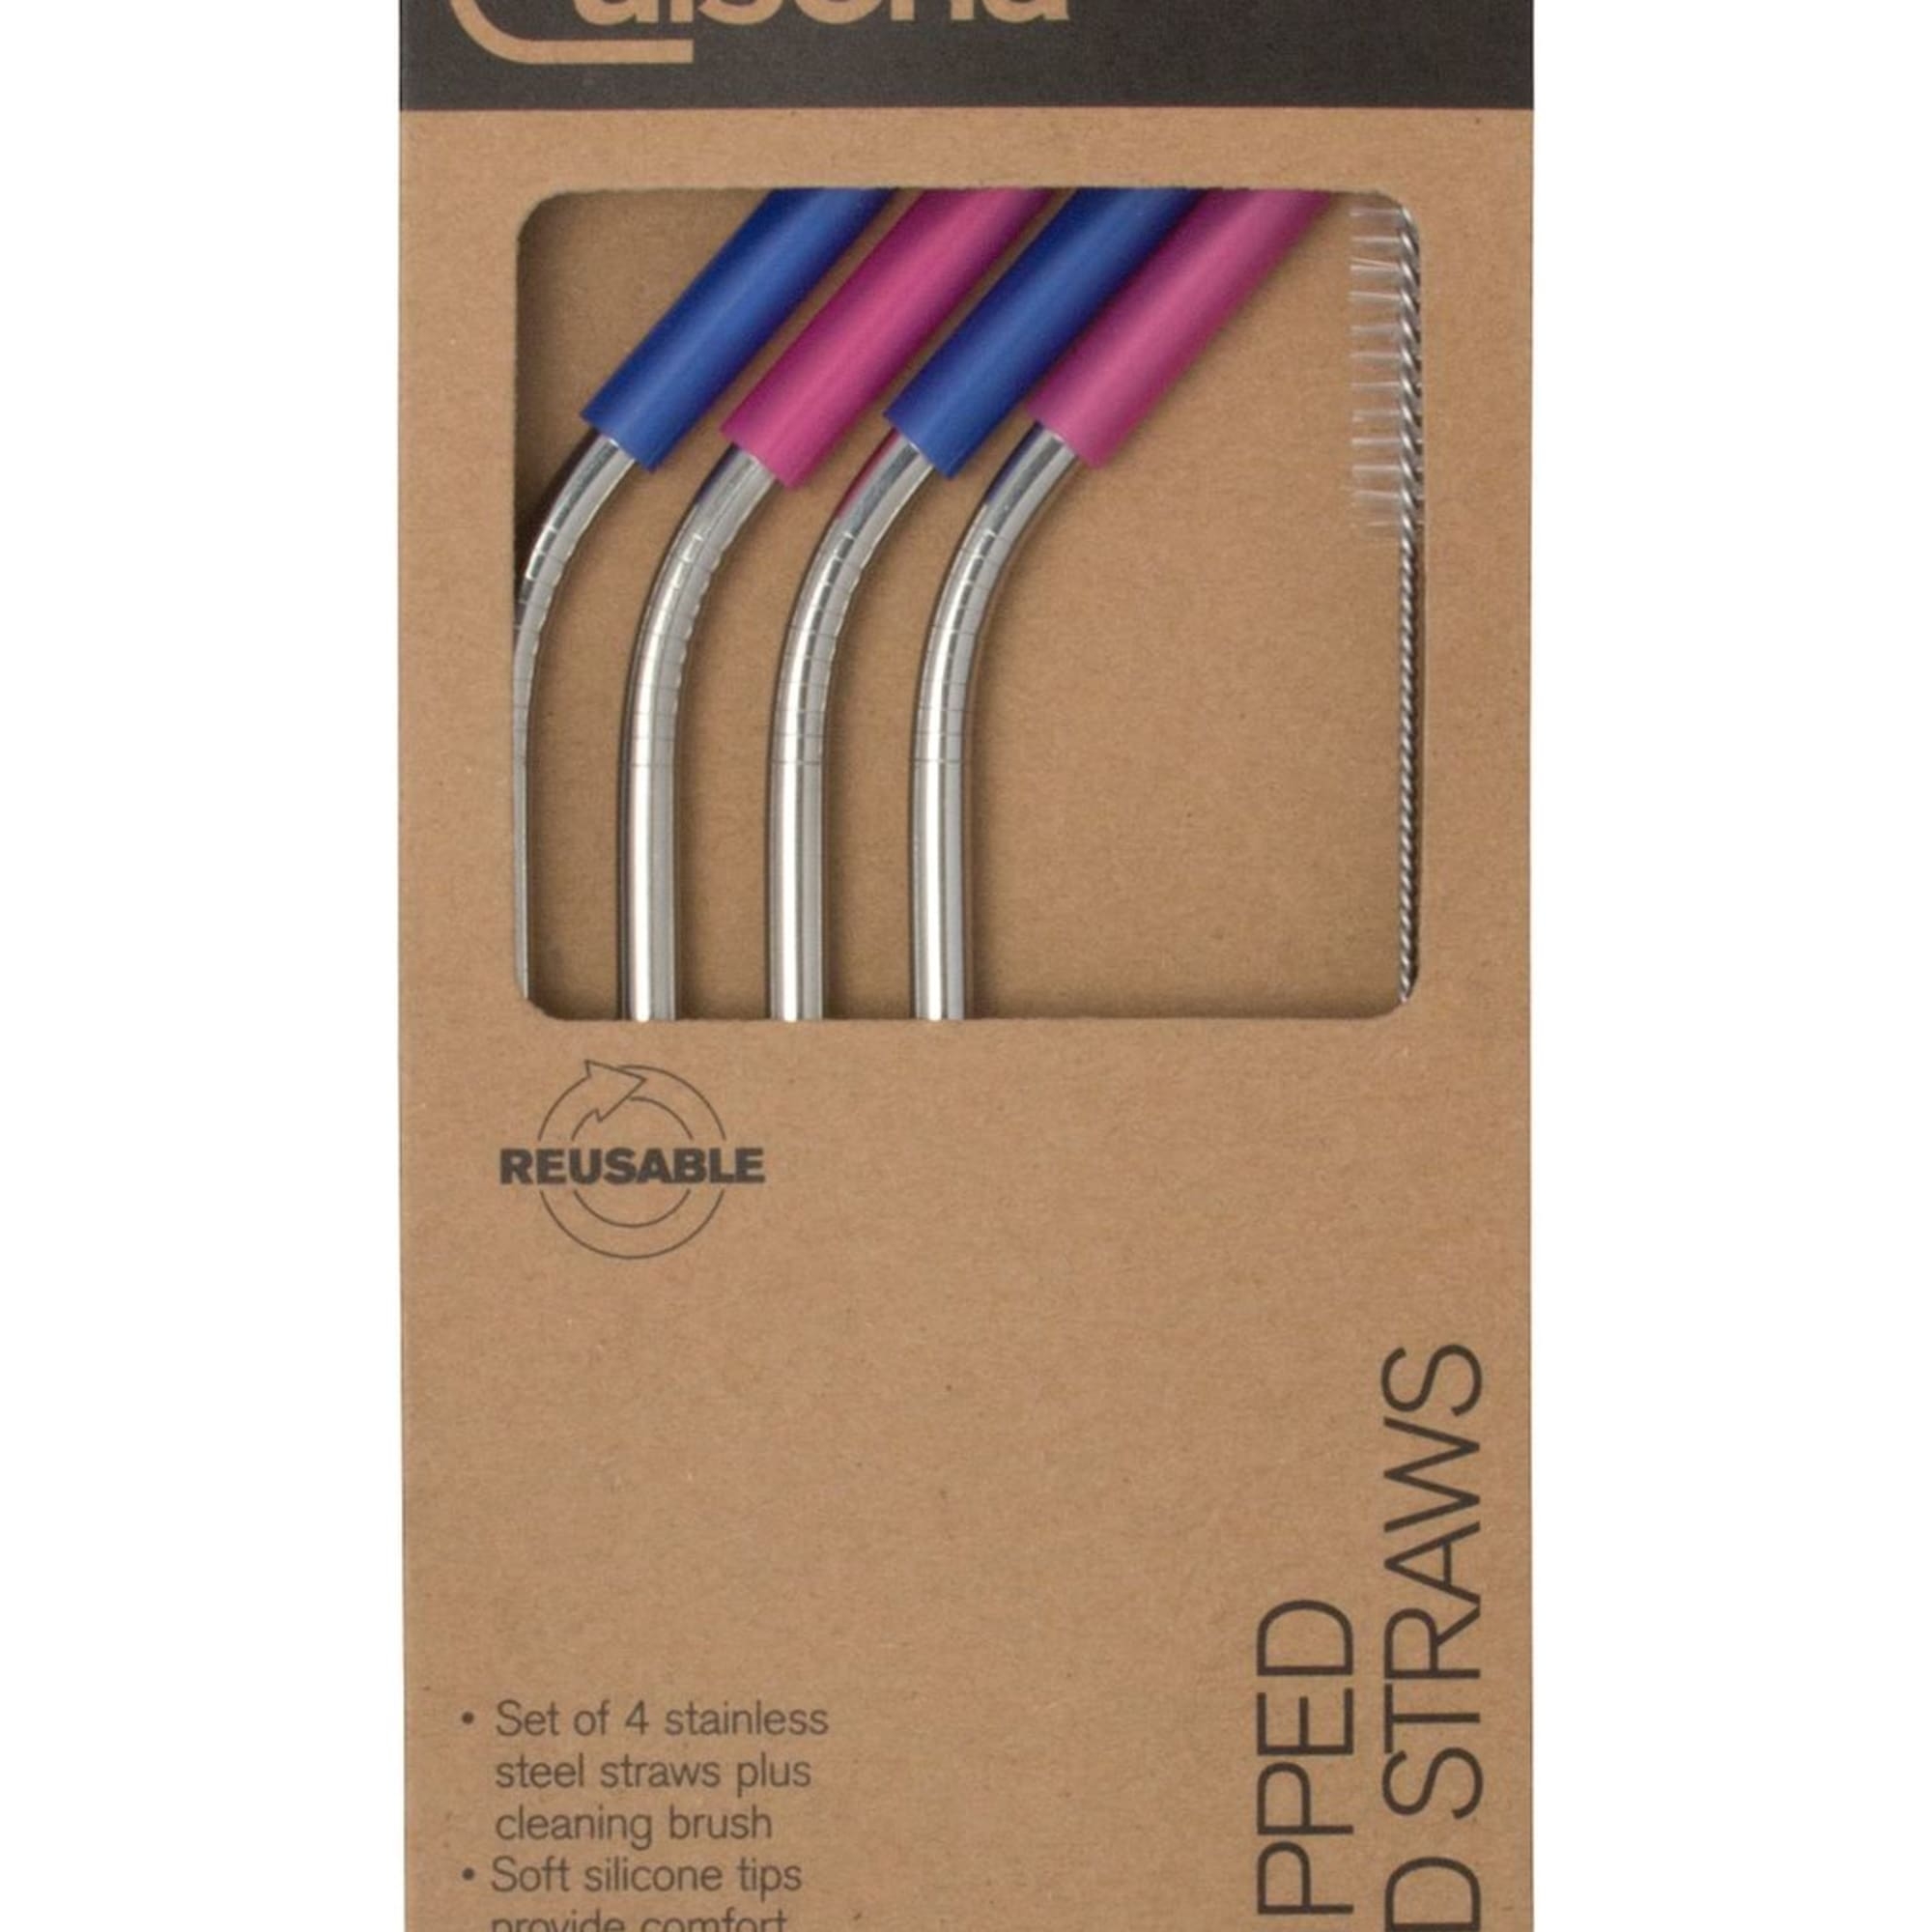 Cuisena Stainless Steel Straw Silicone Tips with Cleaning Brush Set of 4 Silver Image 2